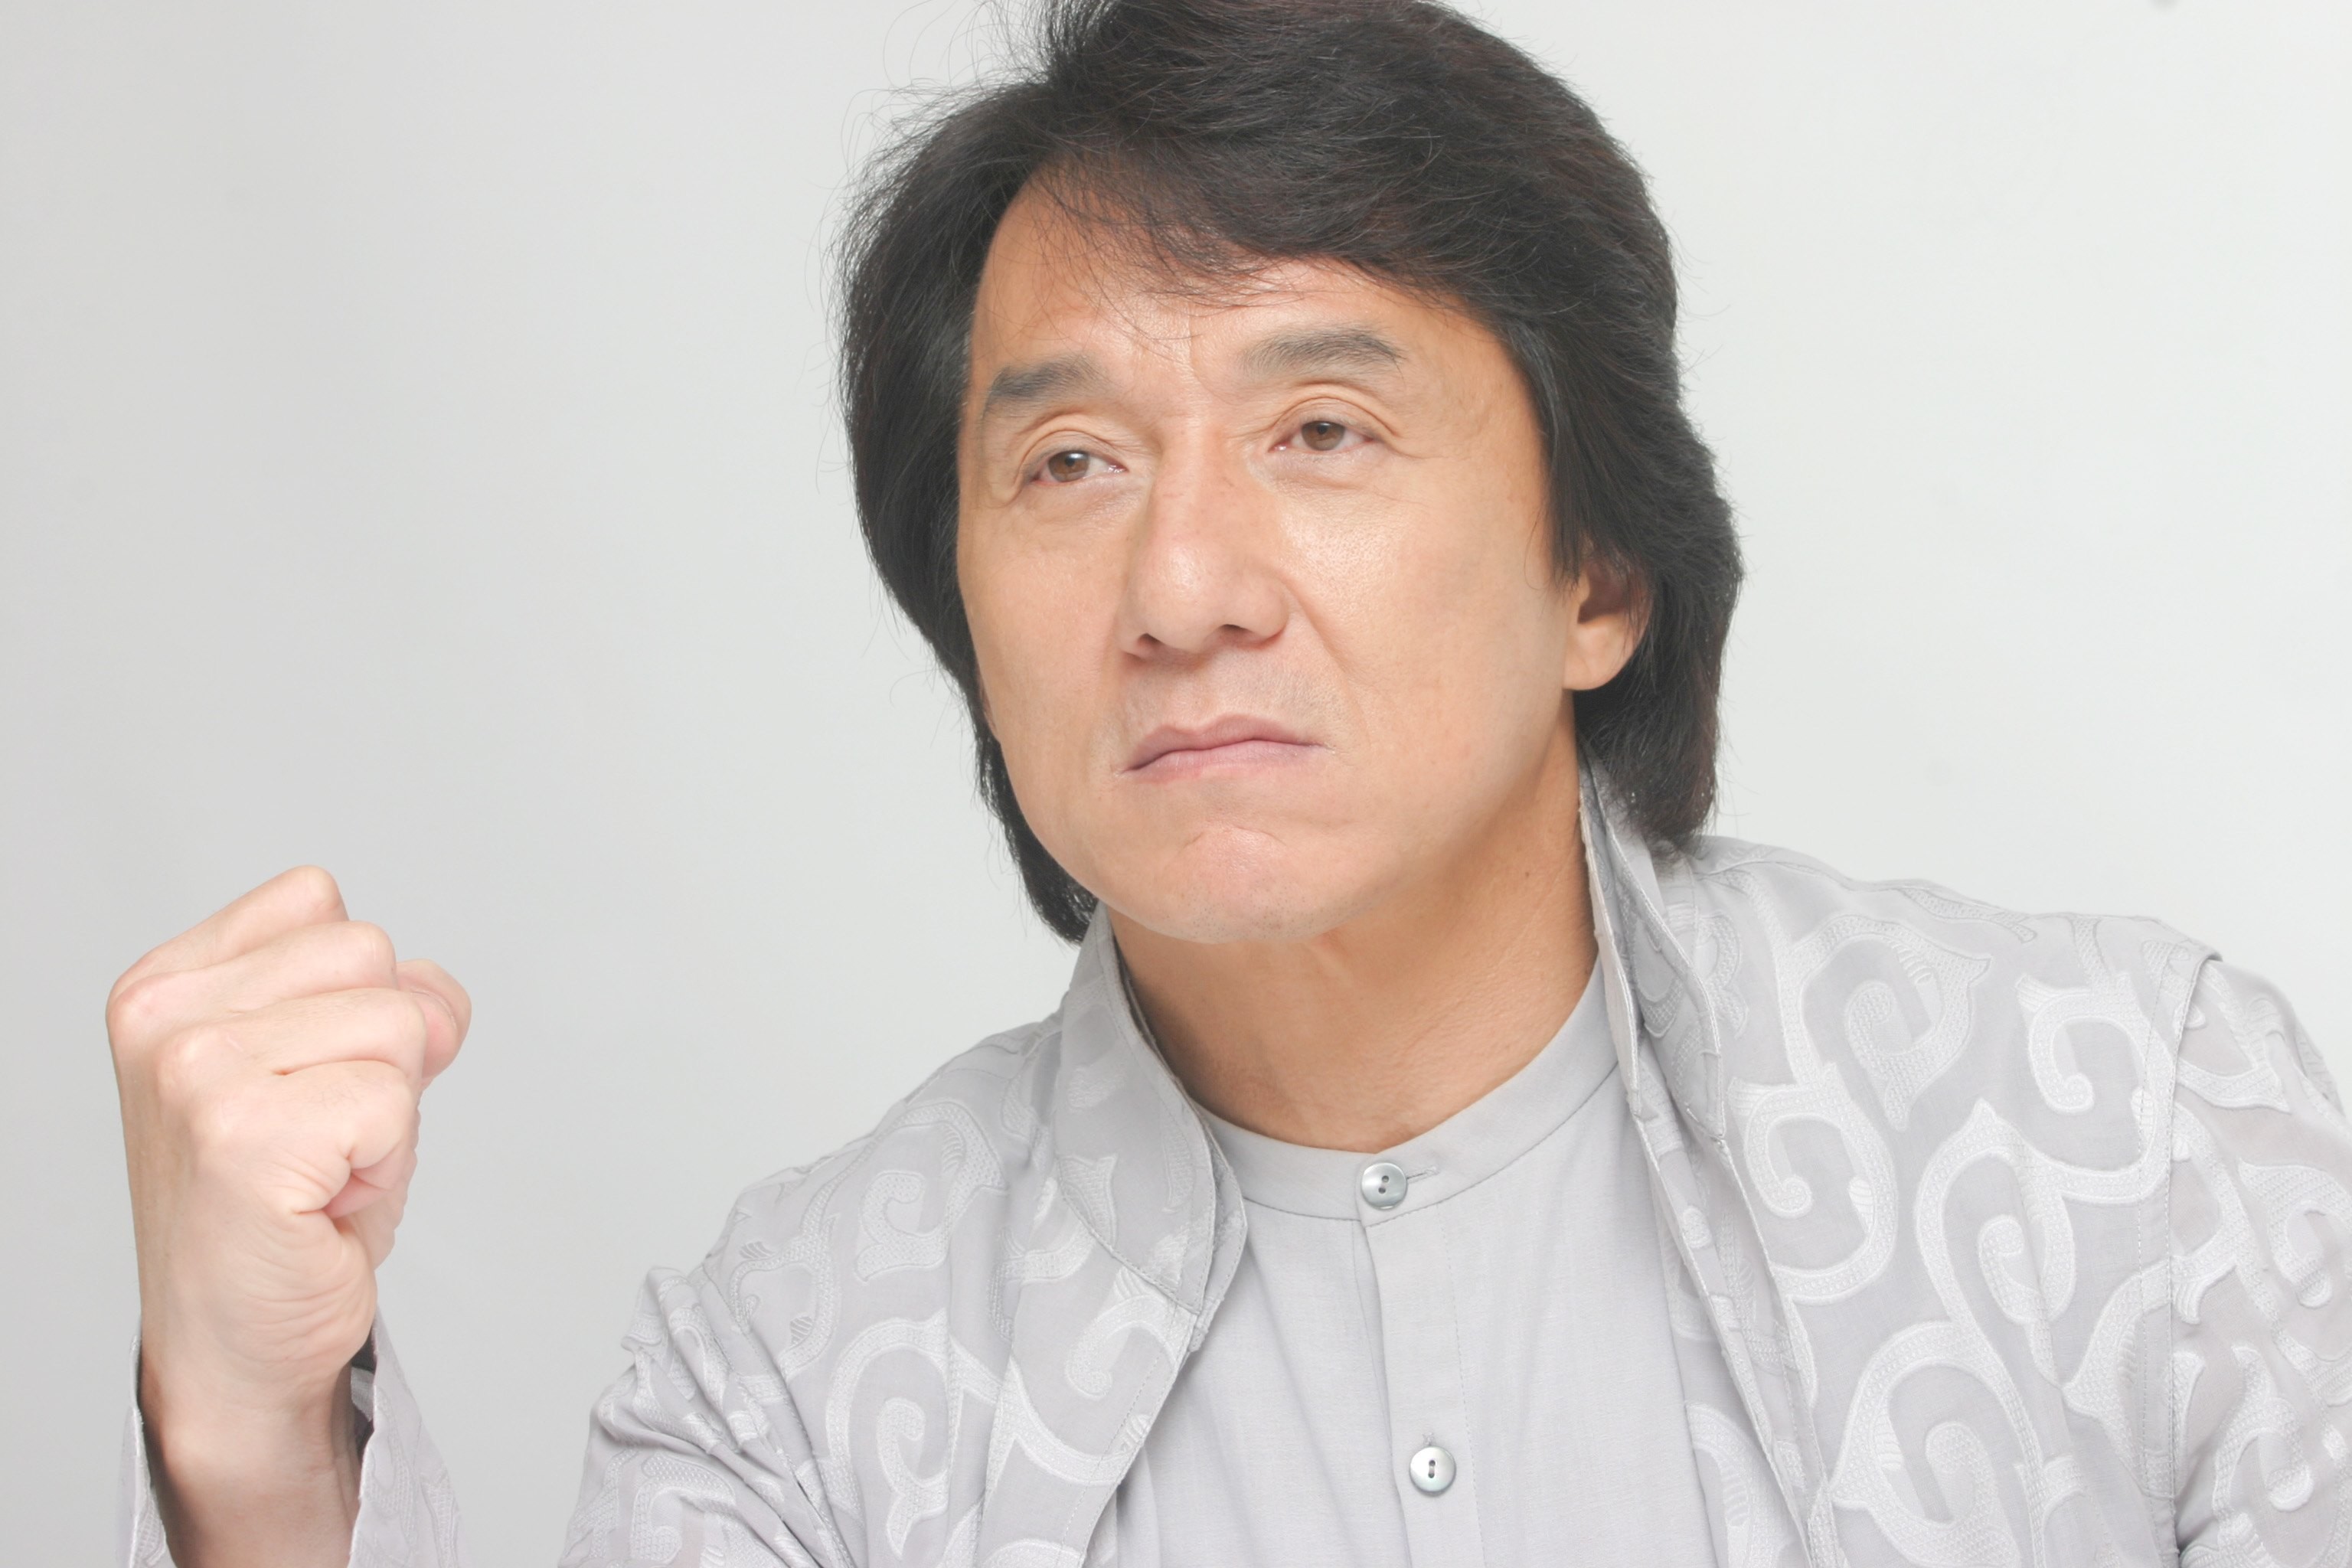 3072x2048 Jackie Chan Full HD Wallpapers Photos Pics Images Startwallpapers. Â«Â«